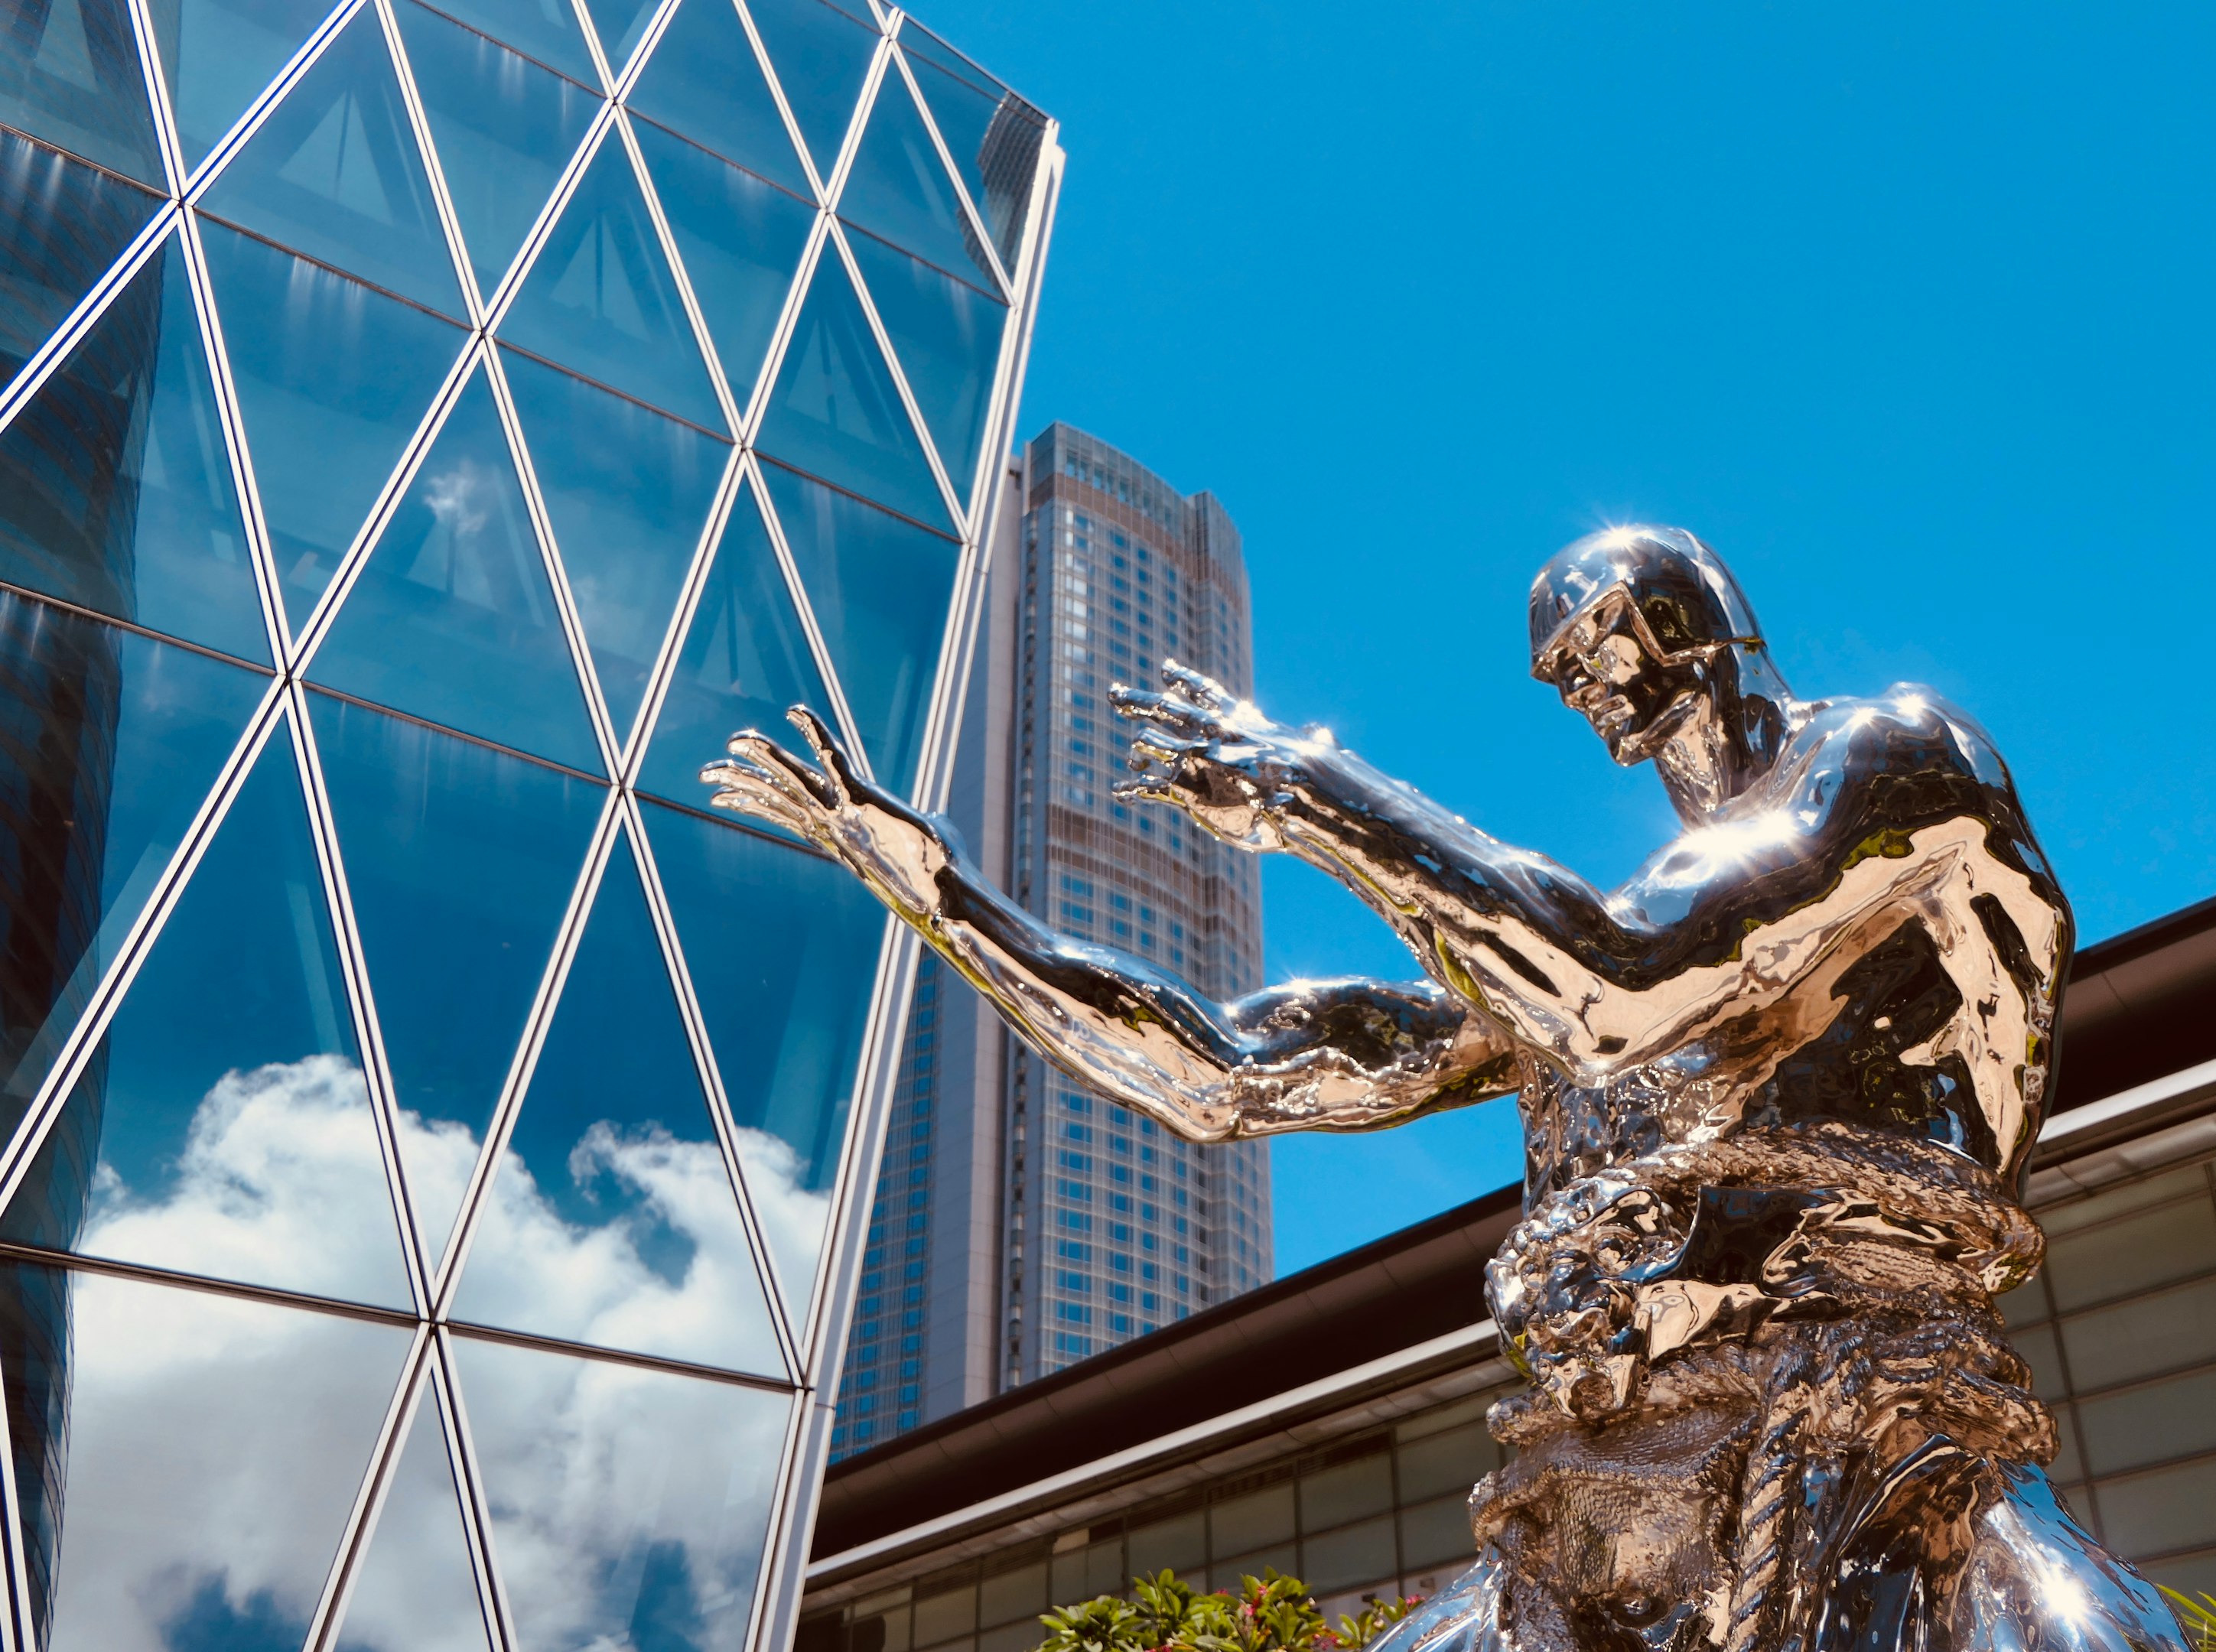 man with wings statue near glass building during daytime